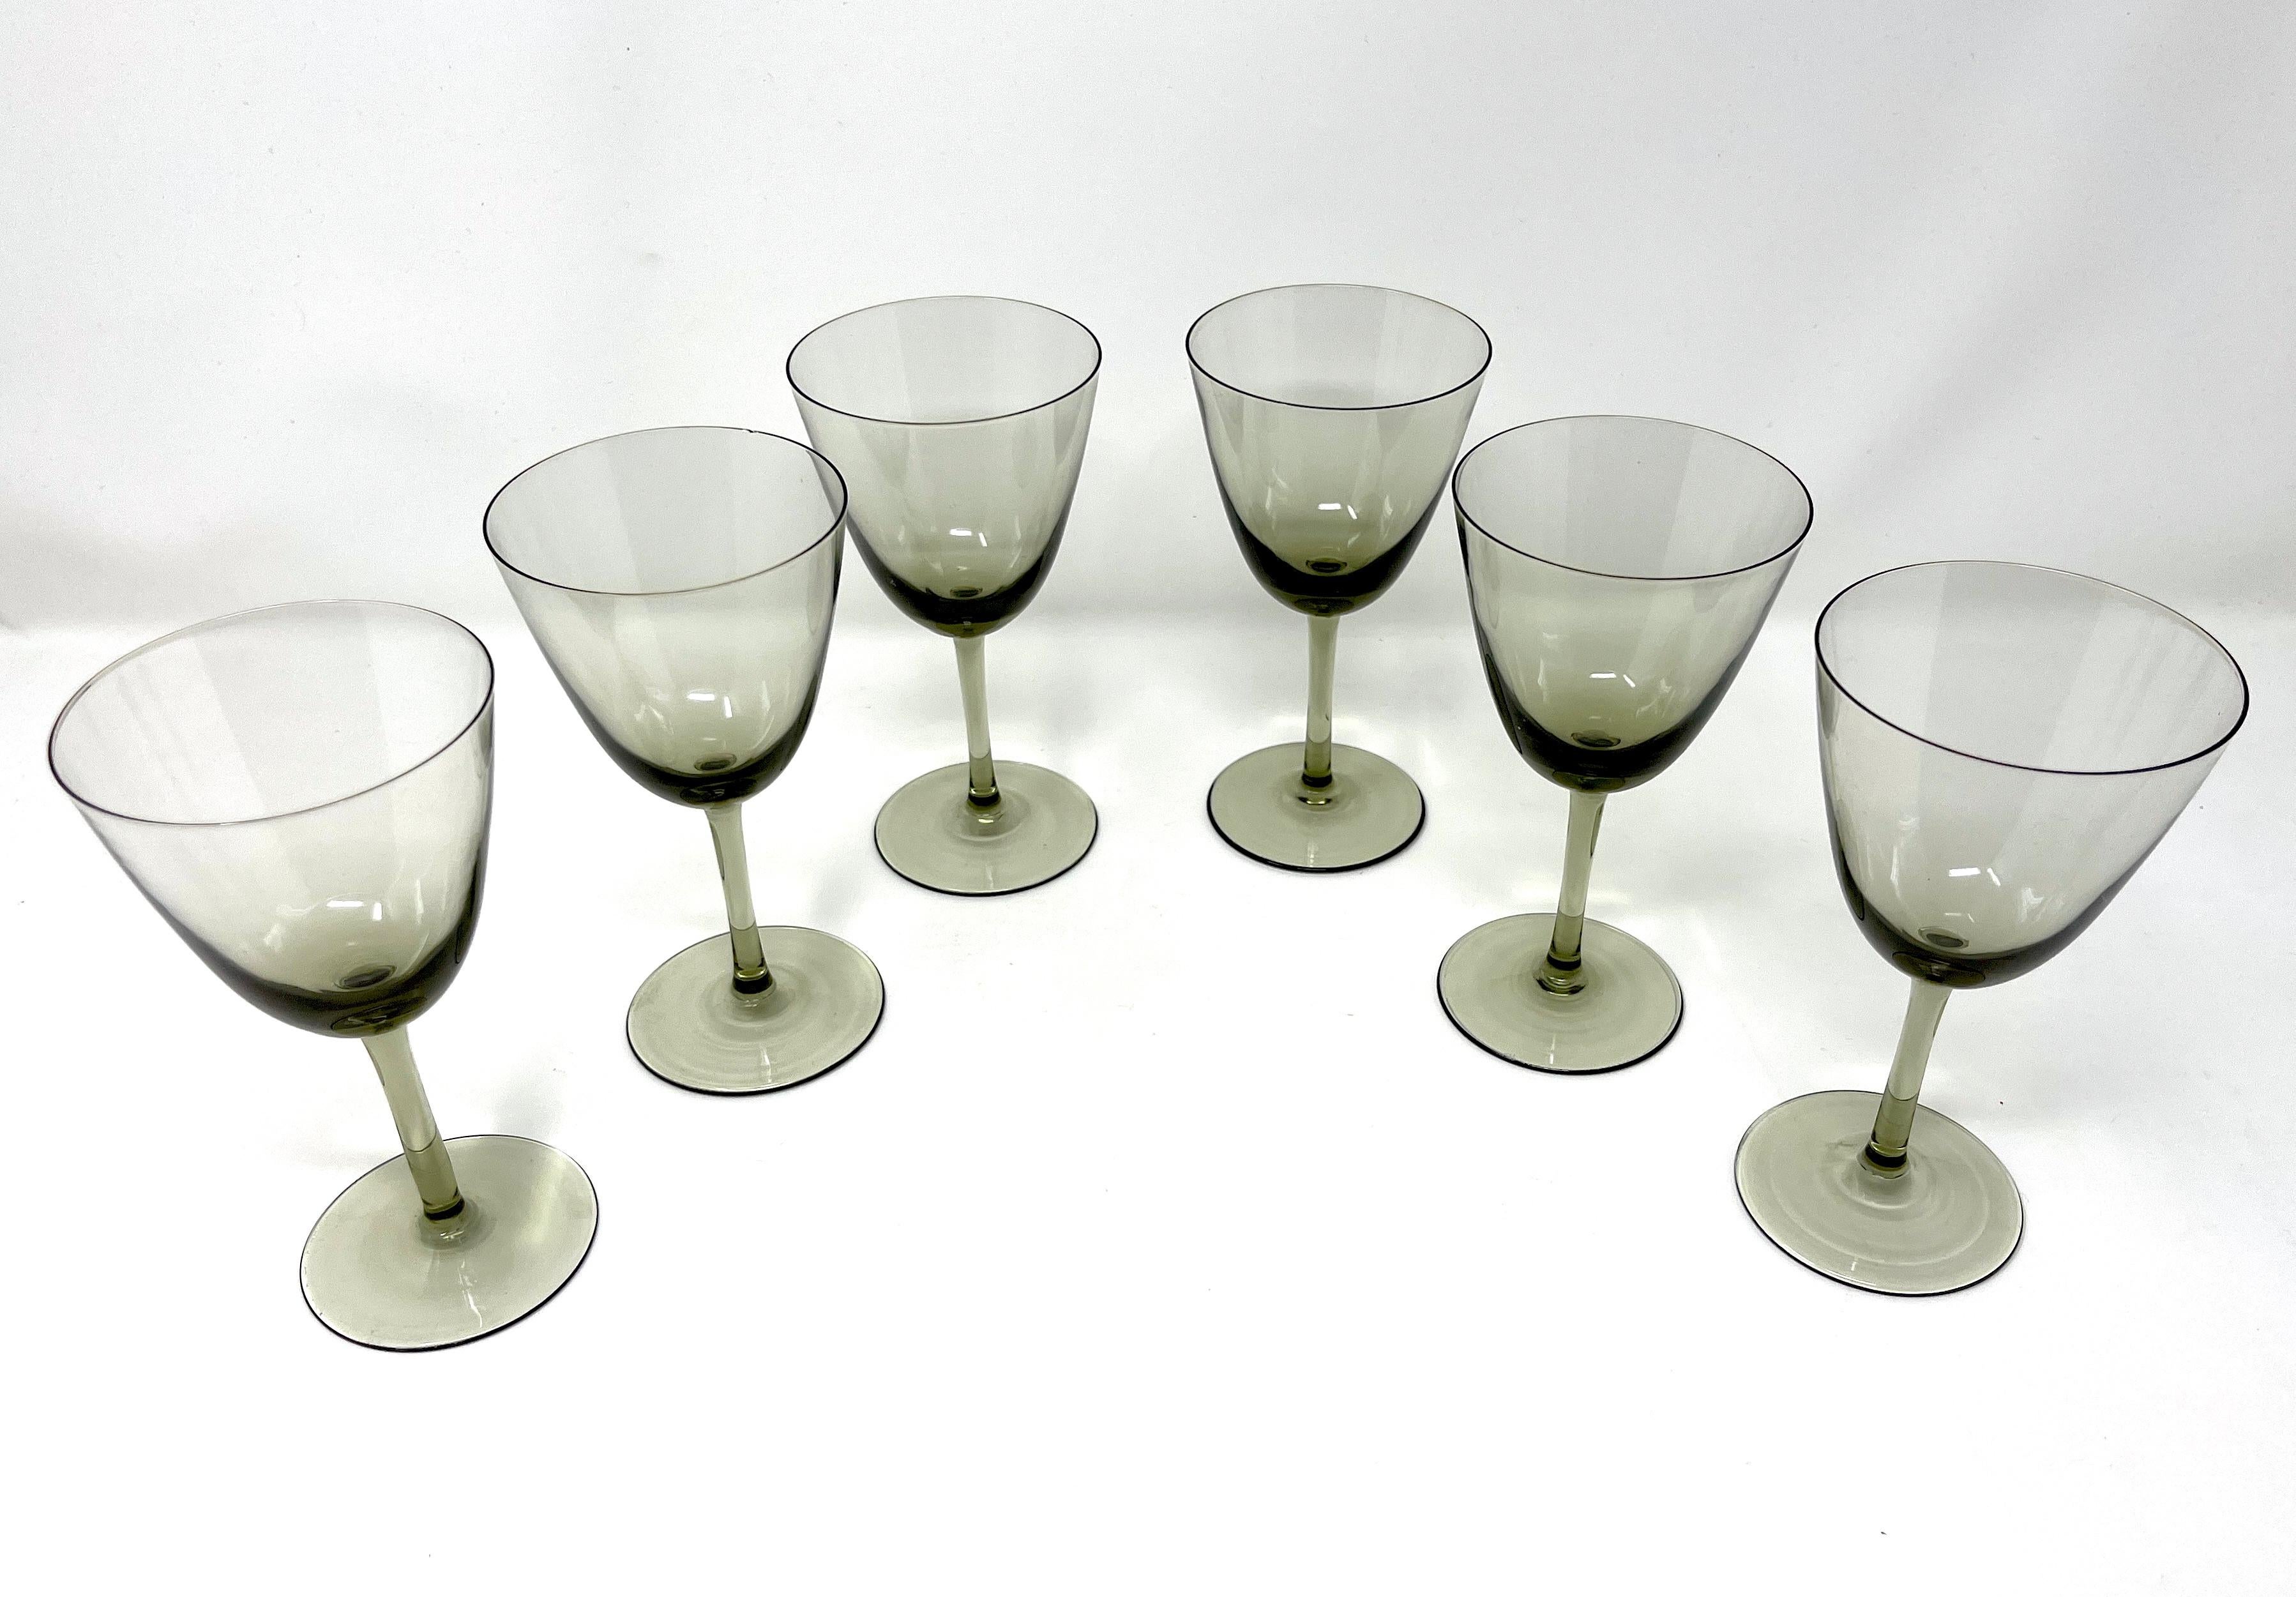 Set of 6 stunning smoke gray stemmed Danish Modern aperitif glasses. There are no markings, but these feel completely like Danish Modern art glass, handblown, and possibly by Holmegaard. Really gorgeous, sleek and artistic with a very thin top edge.